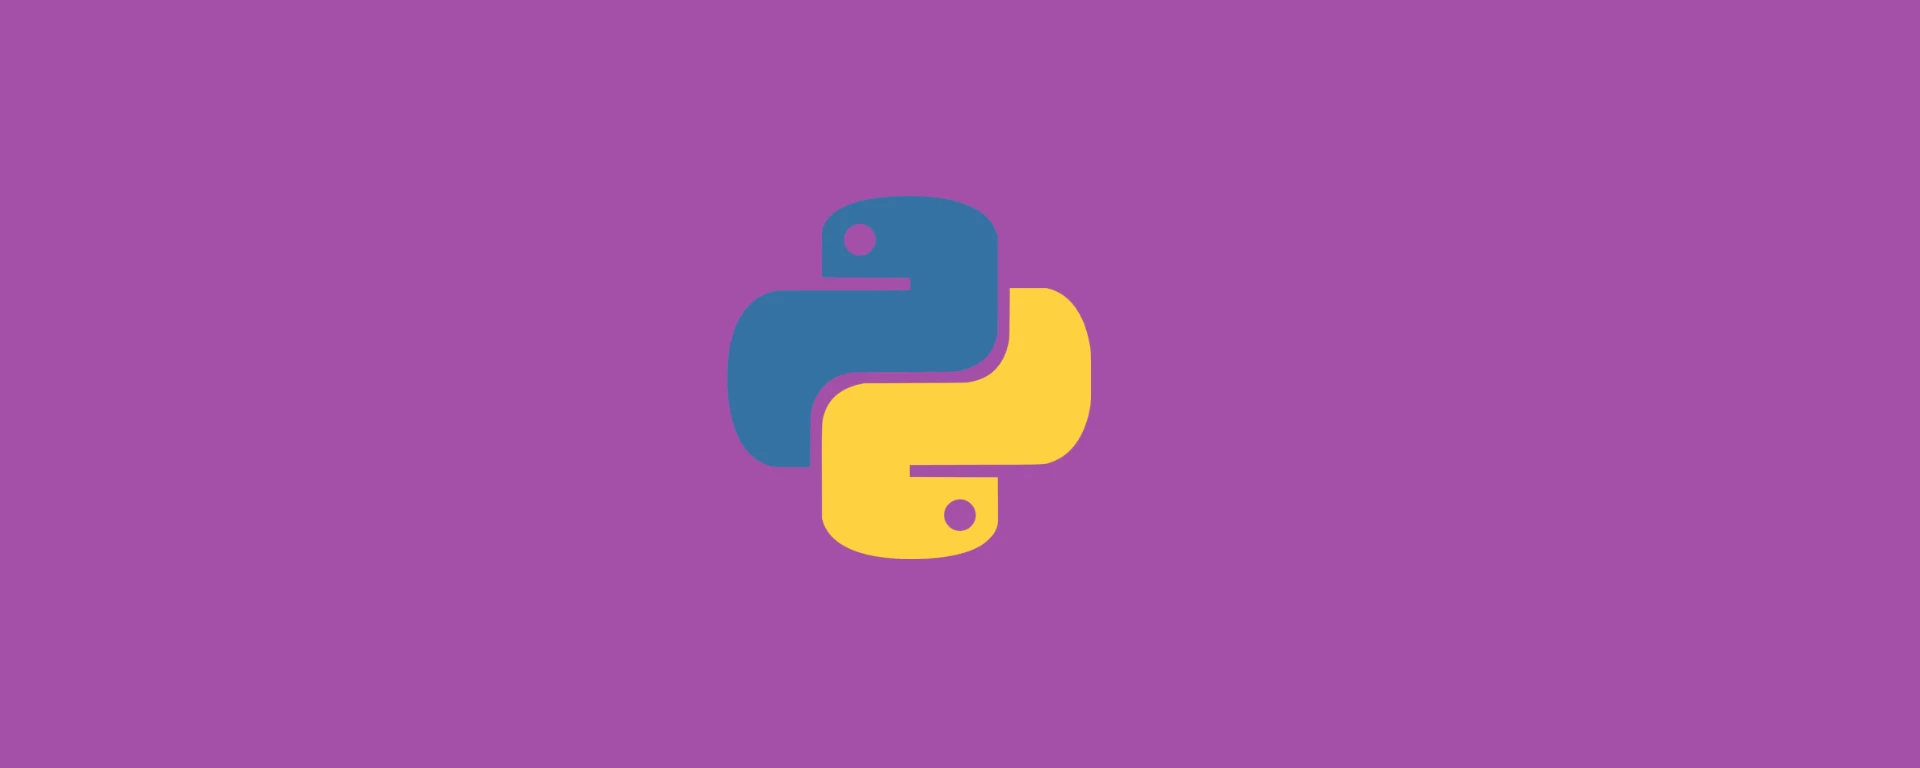 How to get a relative path in Python